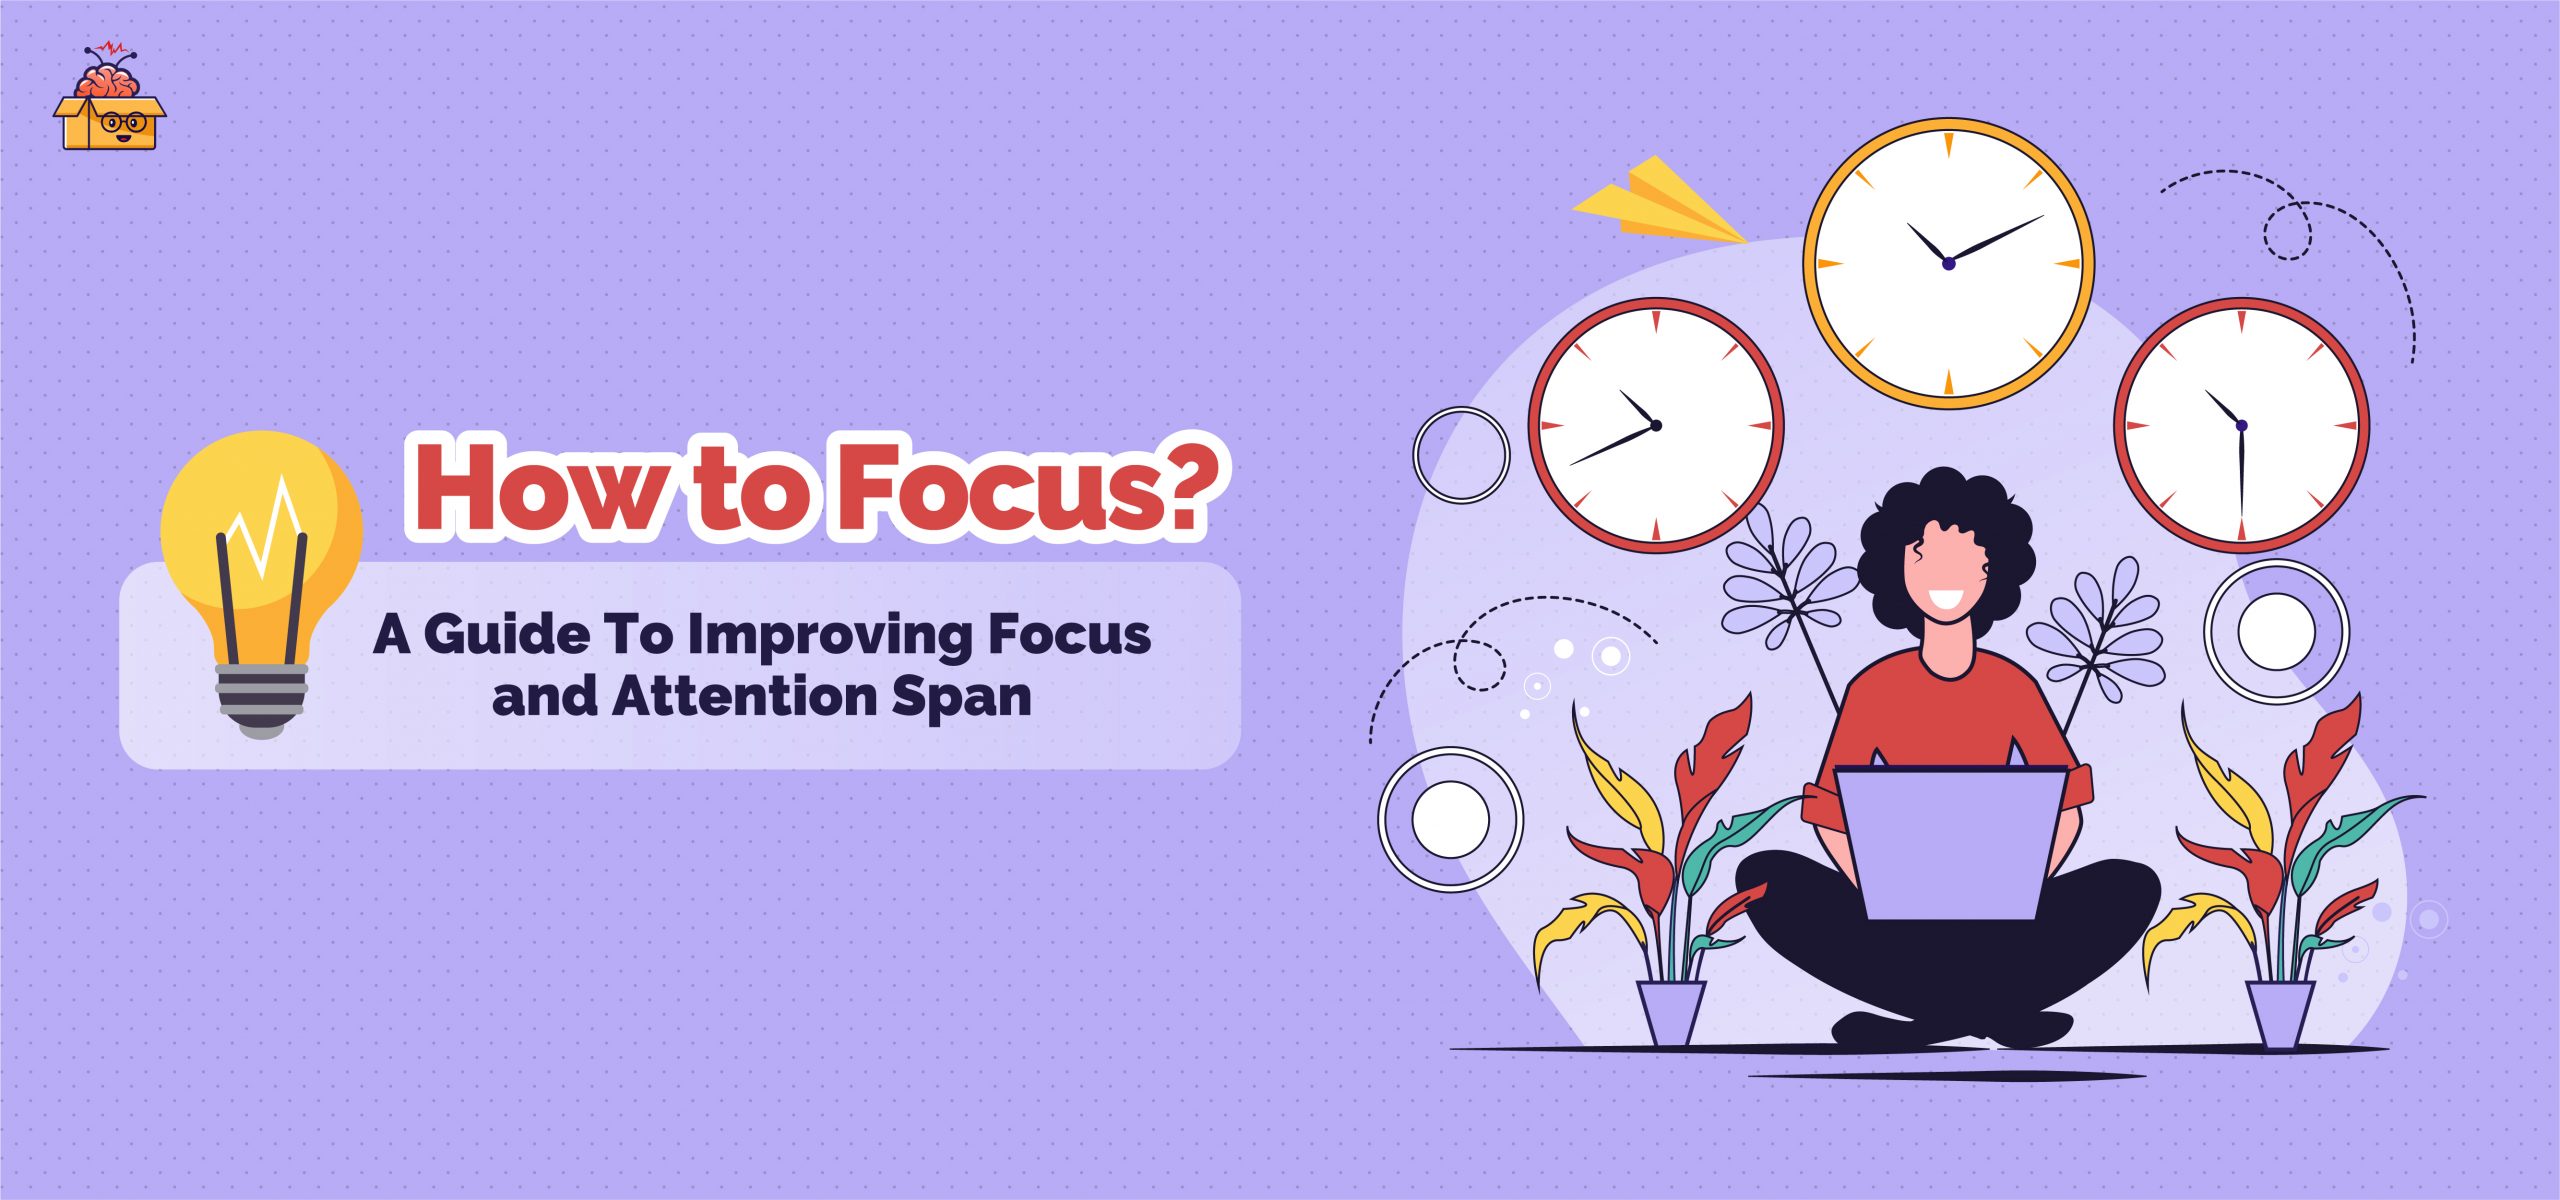 How To Focus: A Practical Guide To Improving Focus and Attention Span